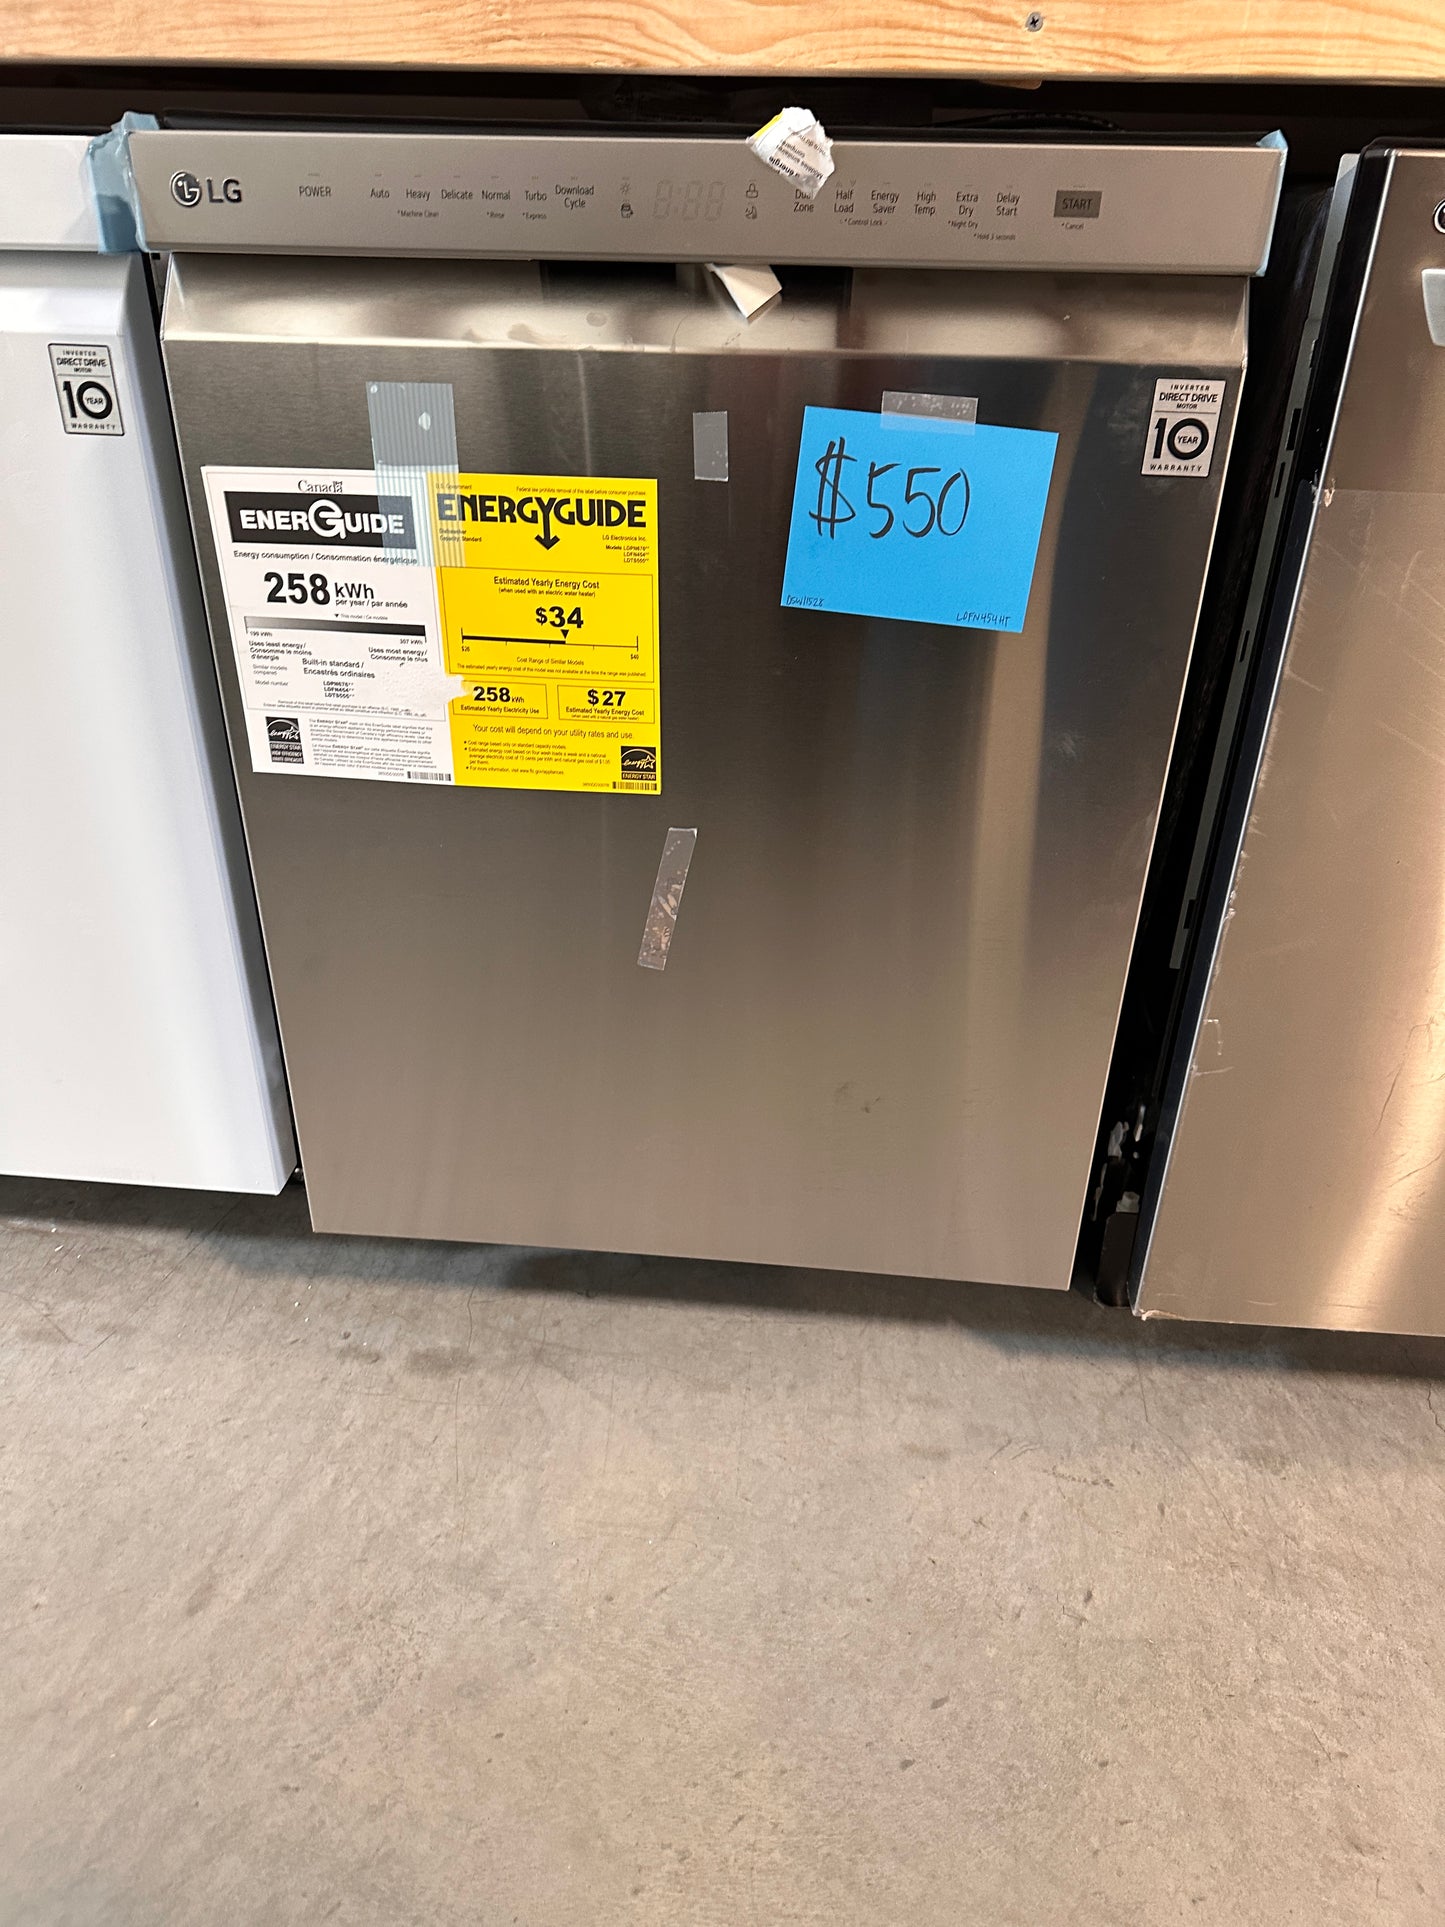 NEW LG DISHWASHER with 3RD RACK and STAINLESS STEEL TUB - DSW11528